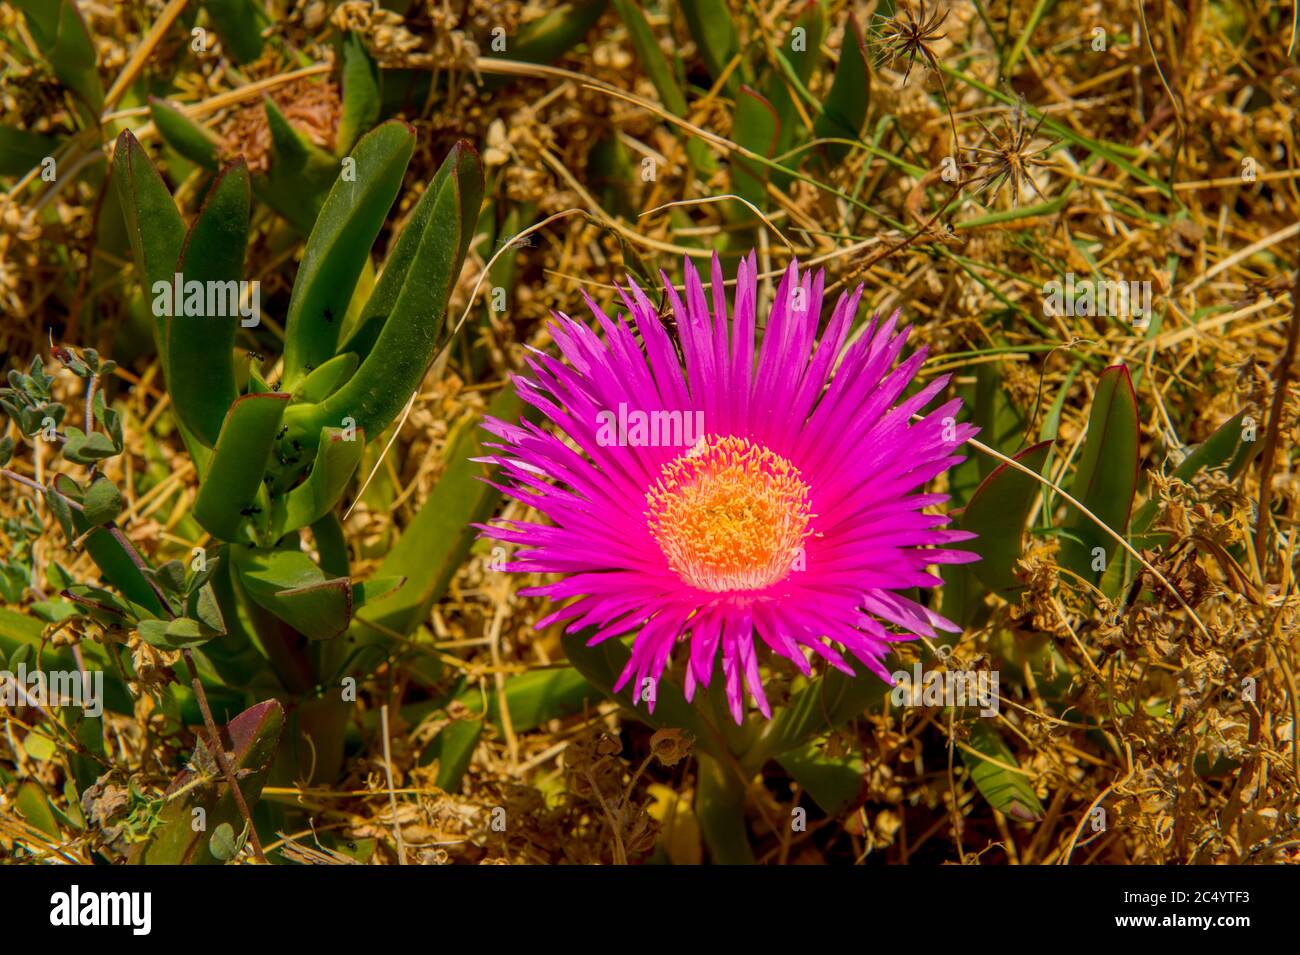 Close-up of Lampranthus (Ice plant) along the beach at in Portopalo di Capopassero, a fishing community on the island of Sicily in Italy. Stock Photo